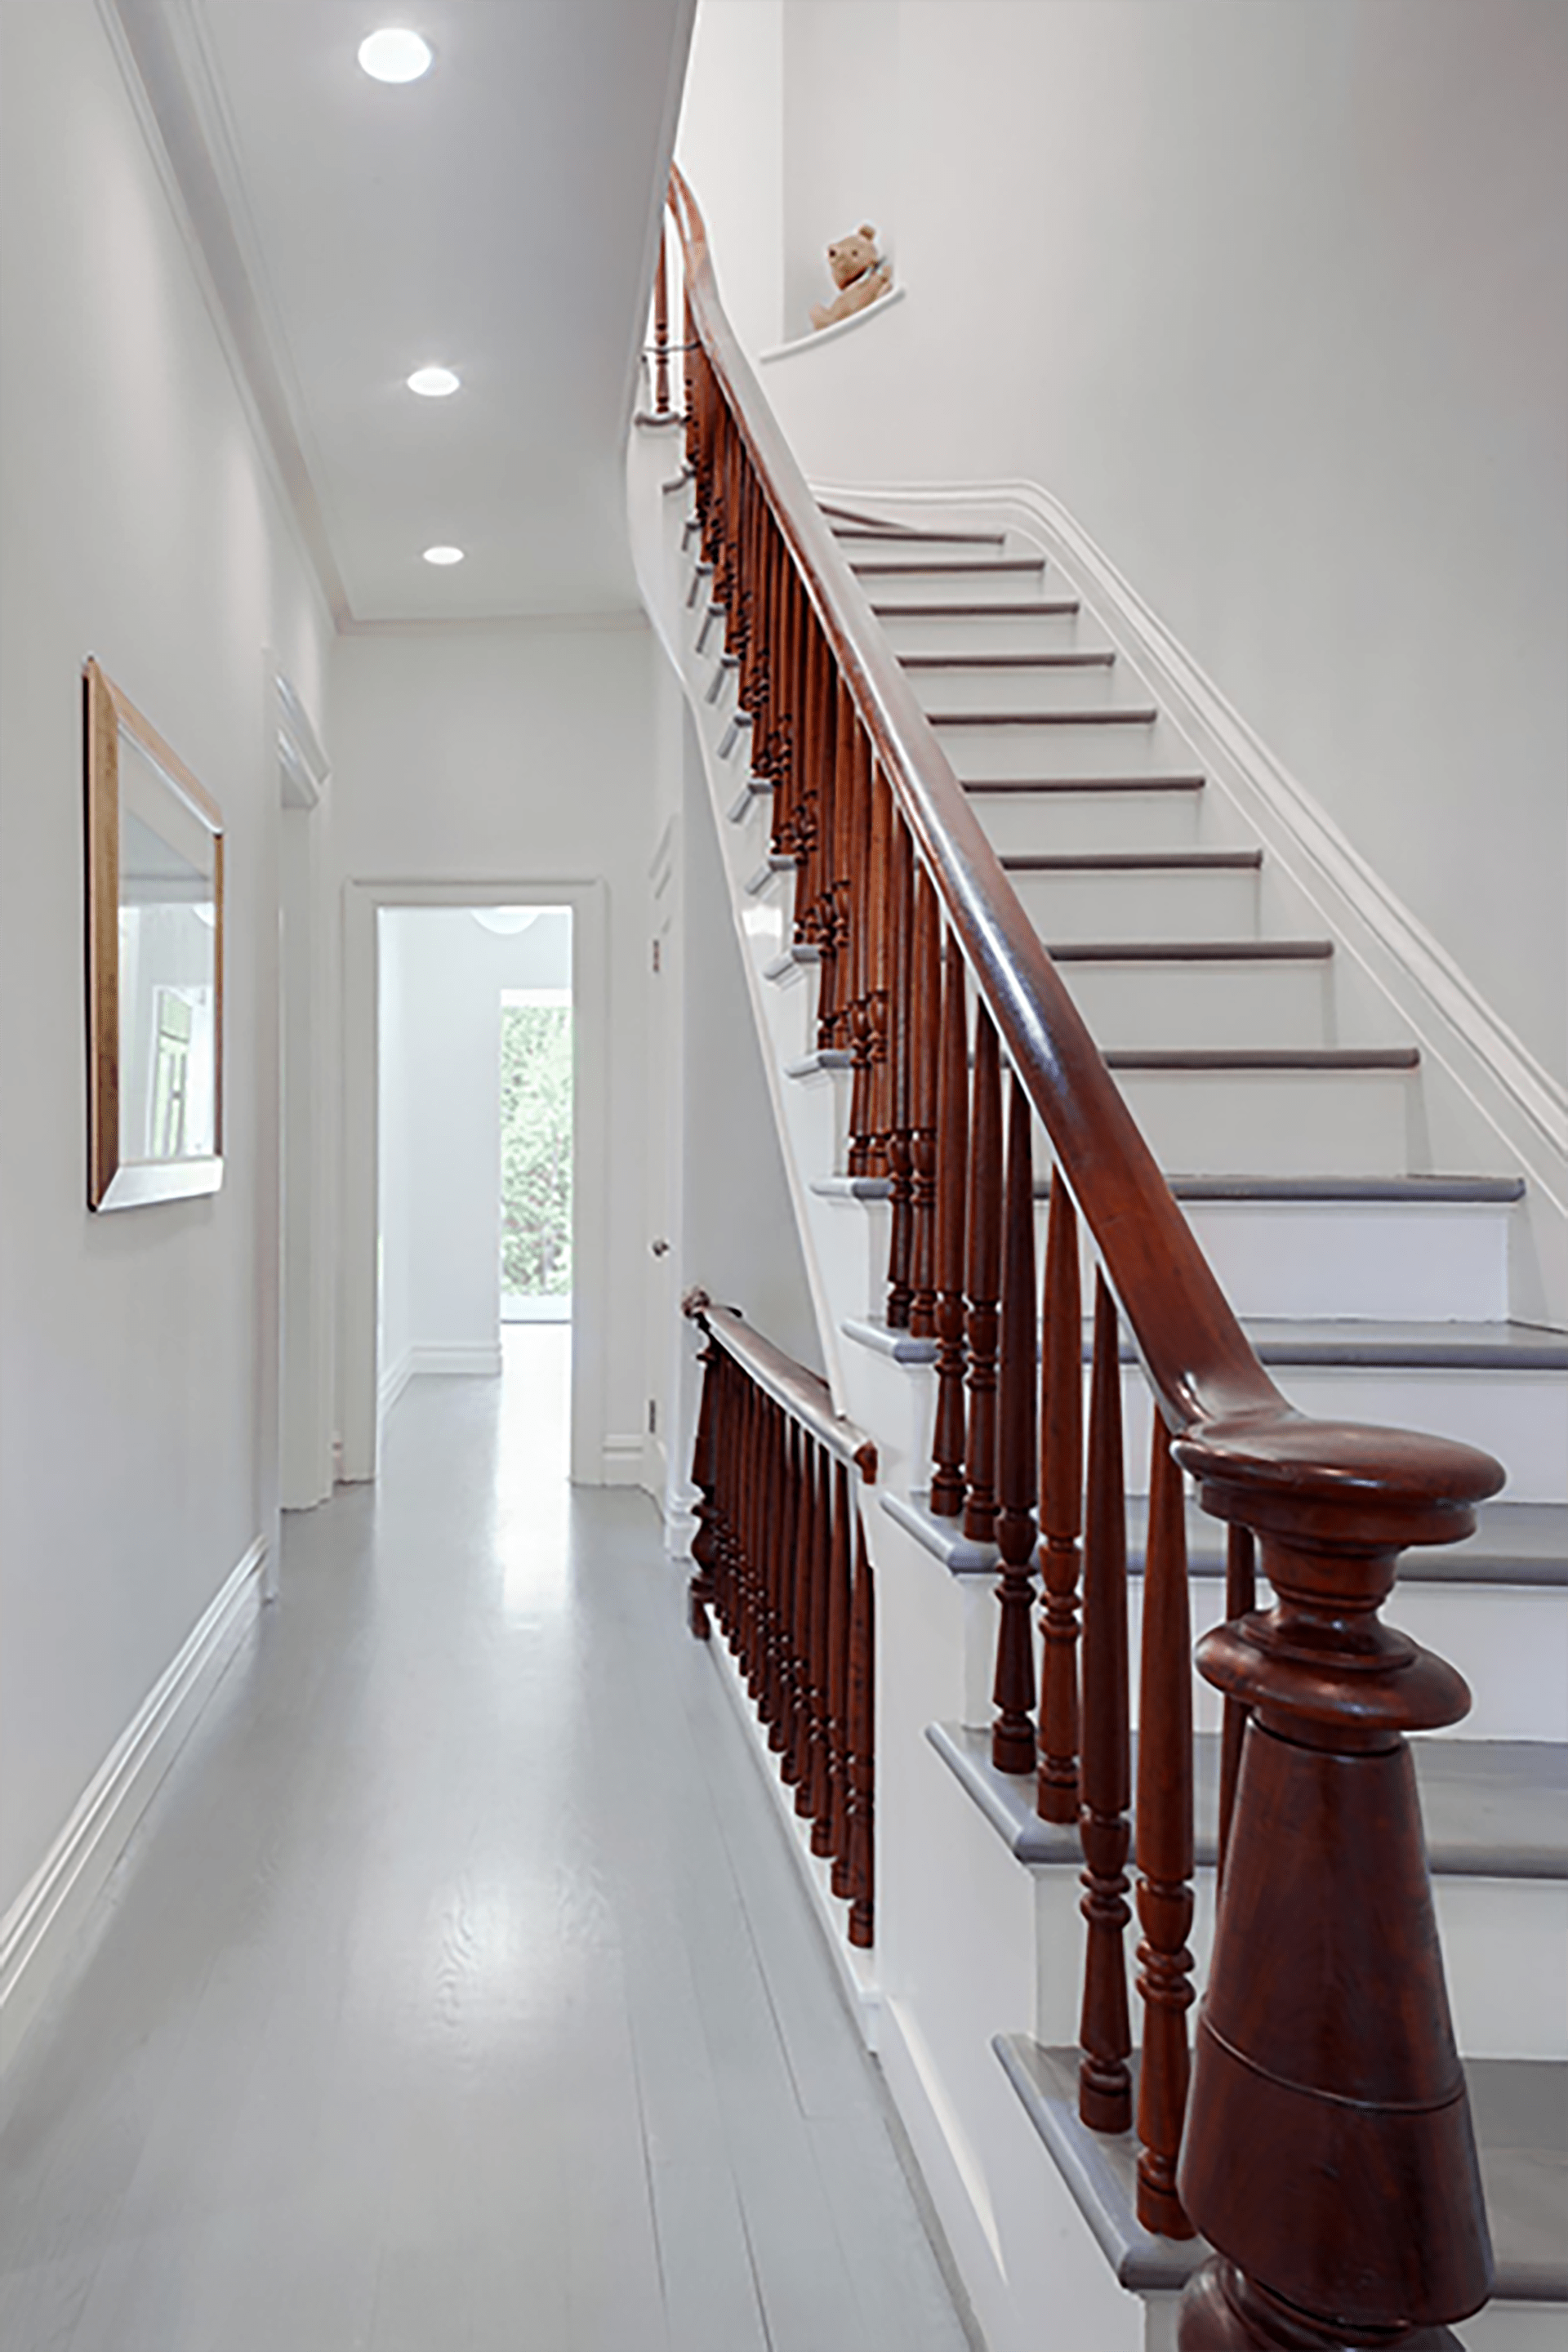 All white hallway with recessed lighting and staircase. The staircase has grey risers and the railings are mahogany.